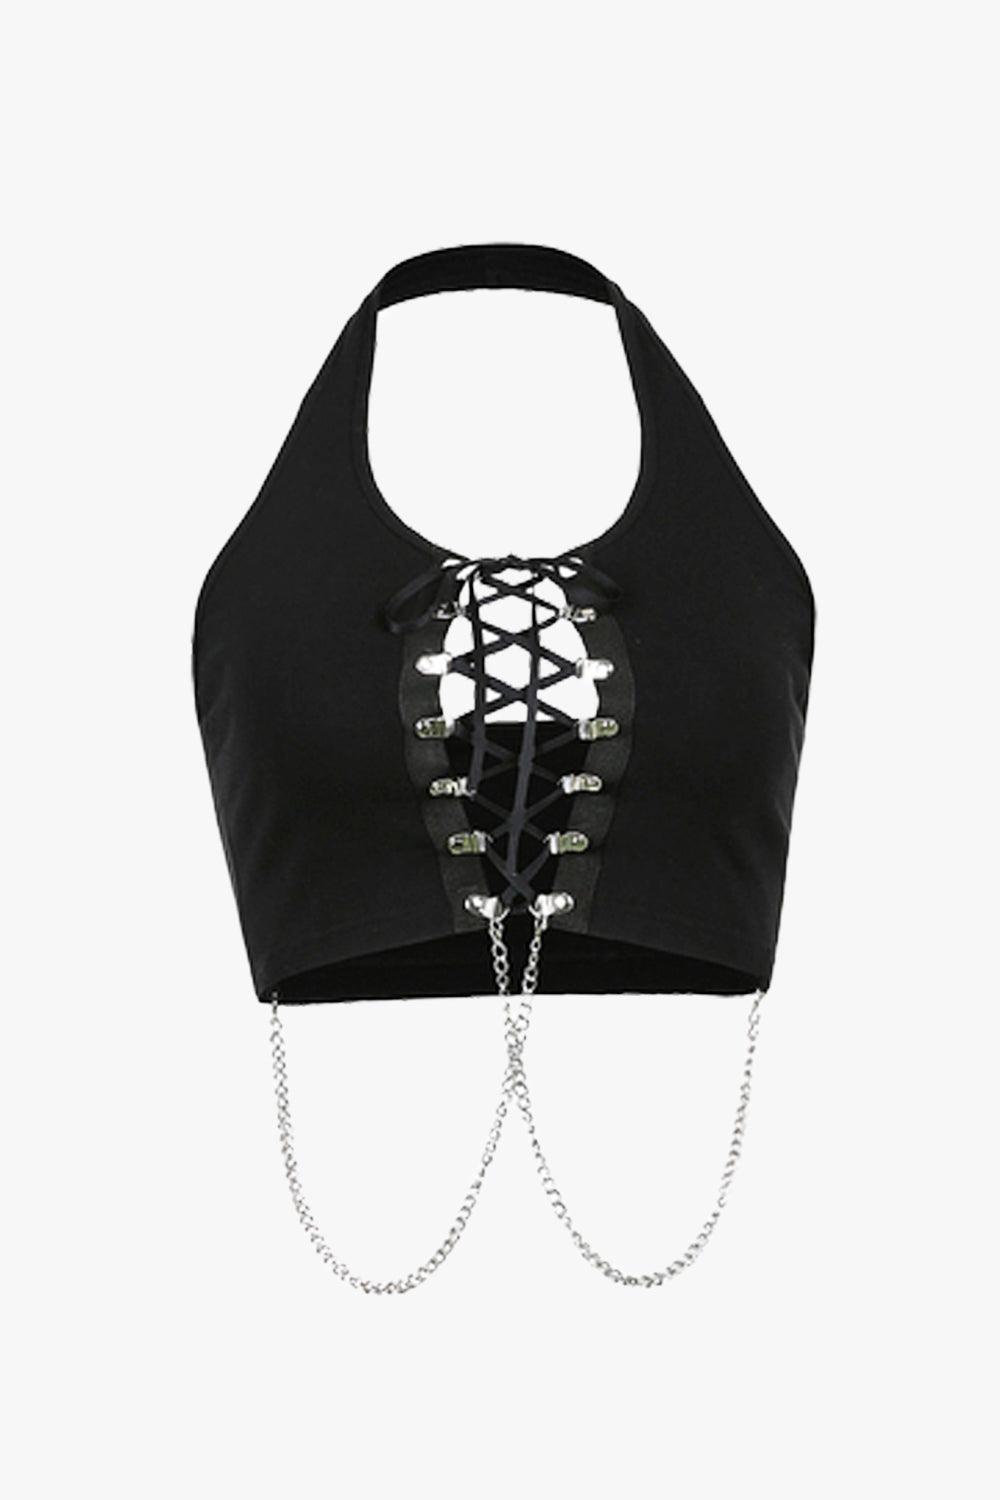 Chest Chains Crop Top Grunge Aesthetic - Aesthetic Clothes Shop